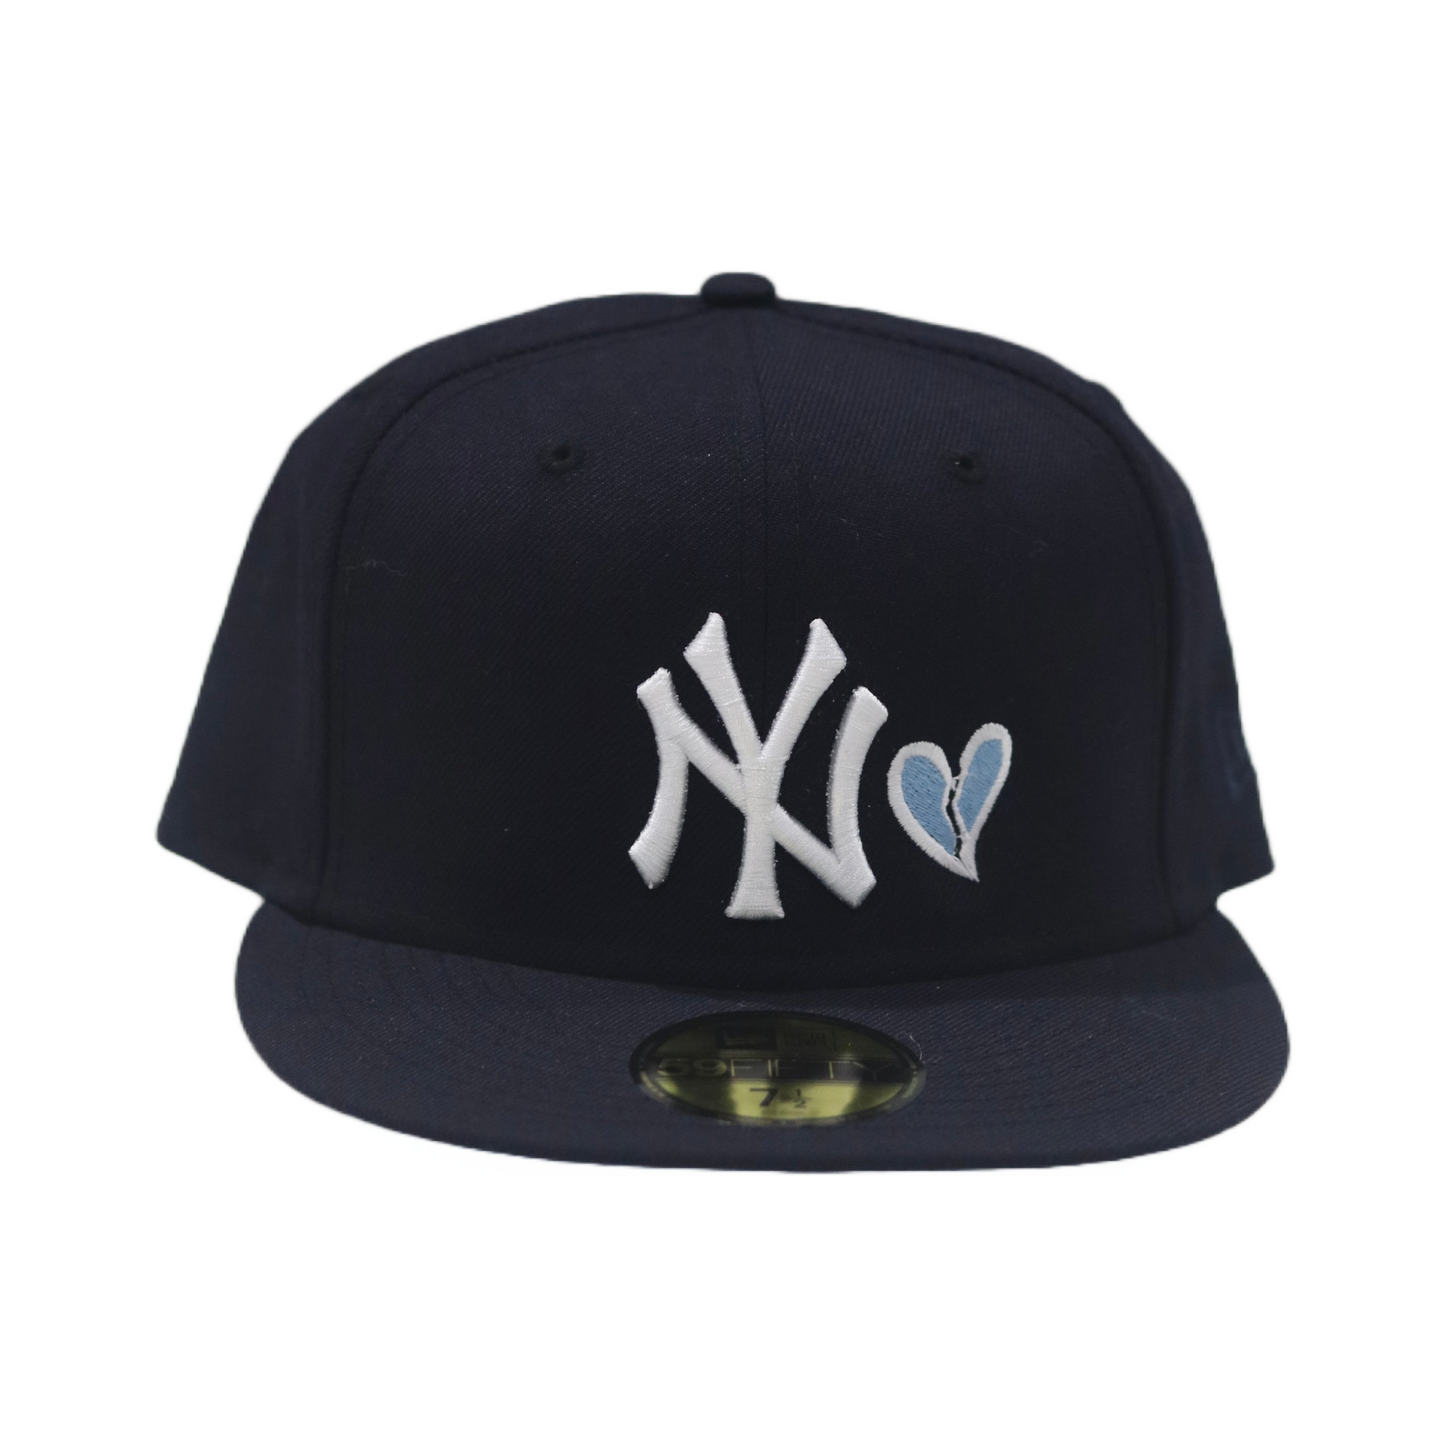 Icy "Heartbreak" Exclusive New York Yankees 59FIFTY Fitted Cap Sky Blue Undervisor